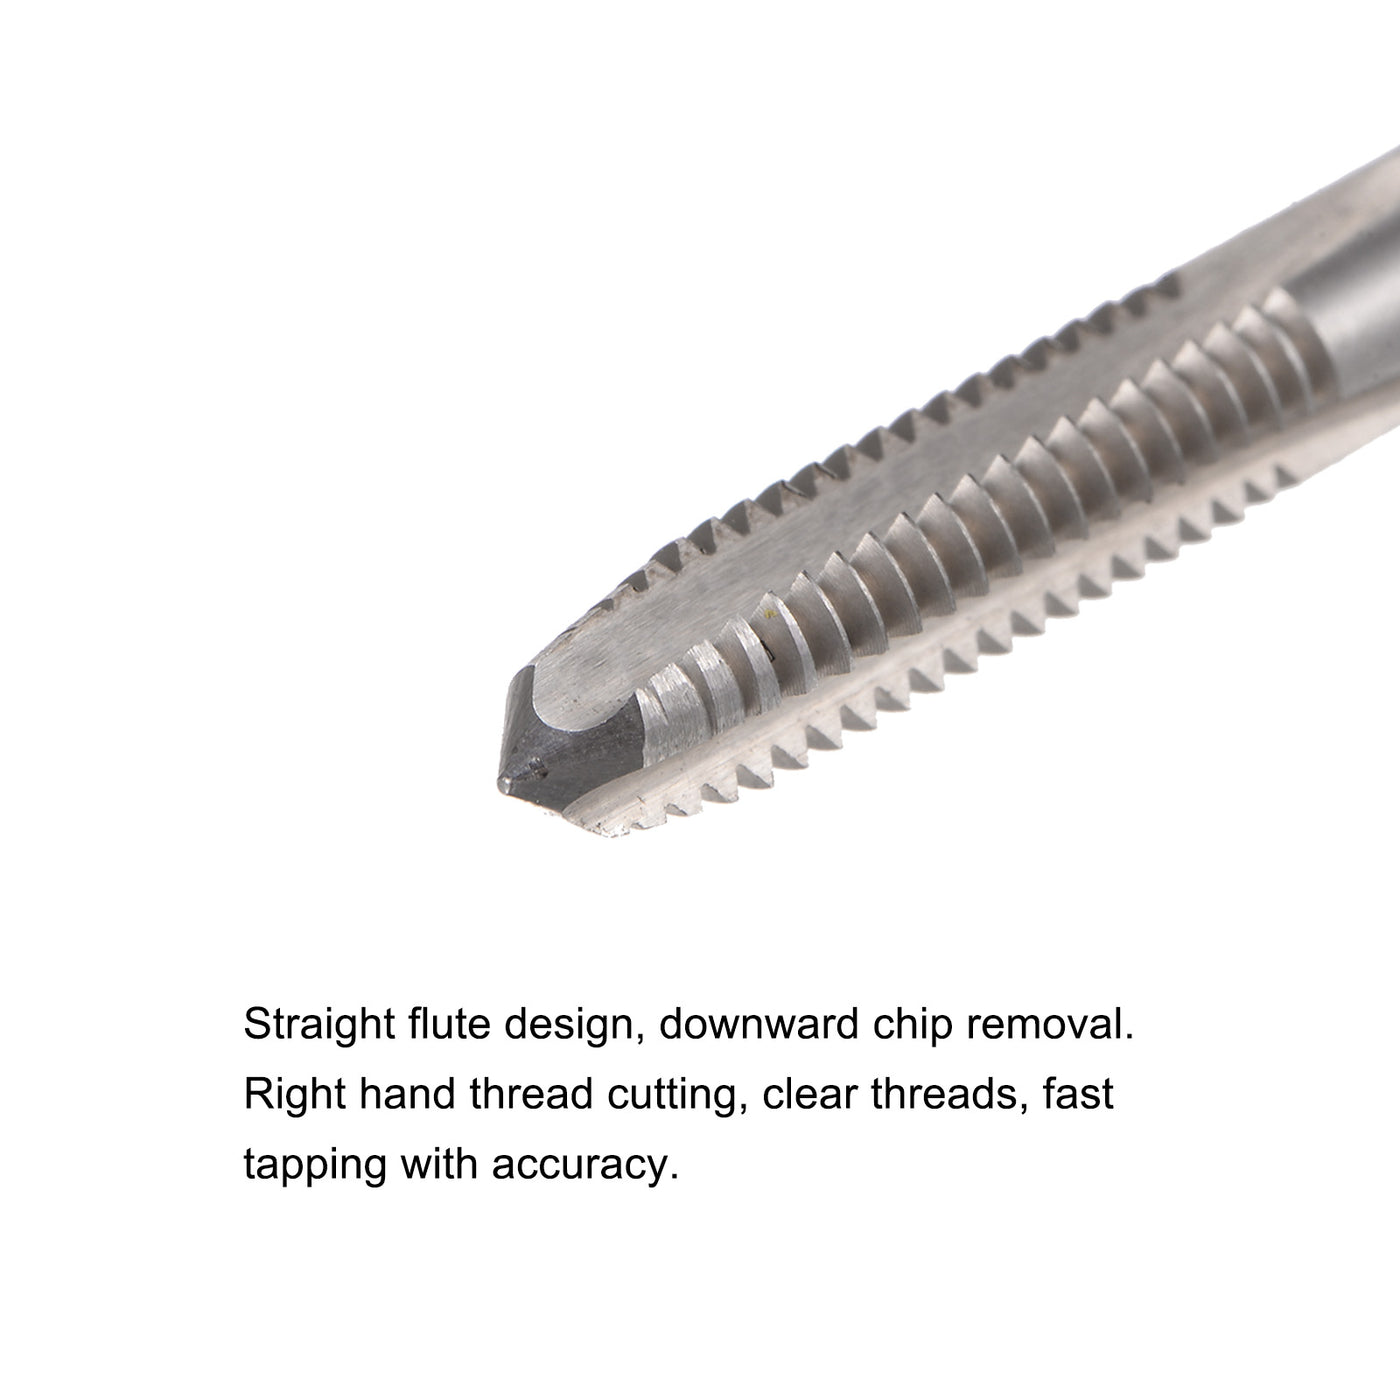 Uxcell Uxcell #6-32 UNC High Speed Steel 4" Length 3 Straight Flute Machine Screw Thread Tap